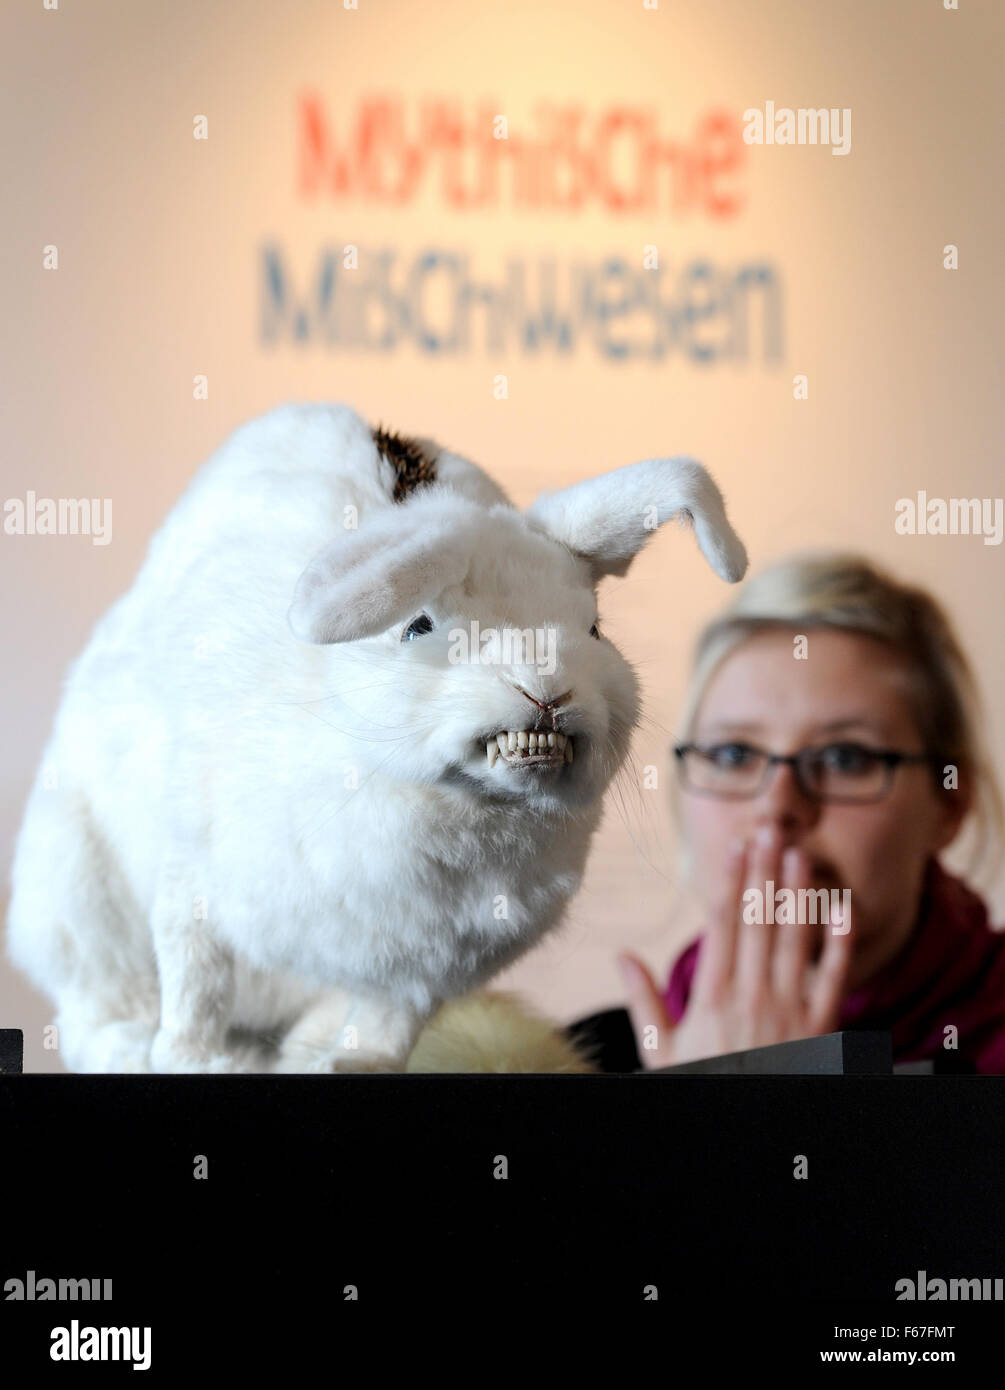 Oldenburg, Germany. 13th Nov, 2015. Biologist Maria Will, one of the curators of the special exhibition 'Bestiarium Construendum - Mit Fantasie zu Fabeltier & Co.' looks an evil rabbit with a badger's bite and prickle back at the Landesmuseum Natur & Mensch in Oldenburg, Germany, 13 November 2015. The stuffed animal is part of the Mythical Creatures exhibition which will run from 14 November 2015 to 10 April 2016. Photo: INGO WAGNER/dpa/Alamy Live News Stock Photo